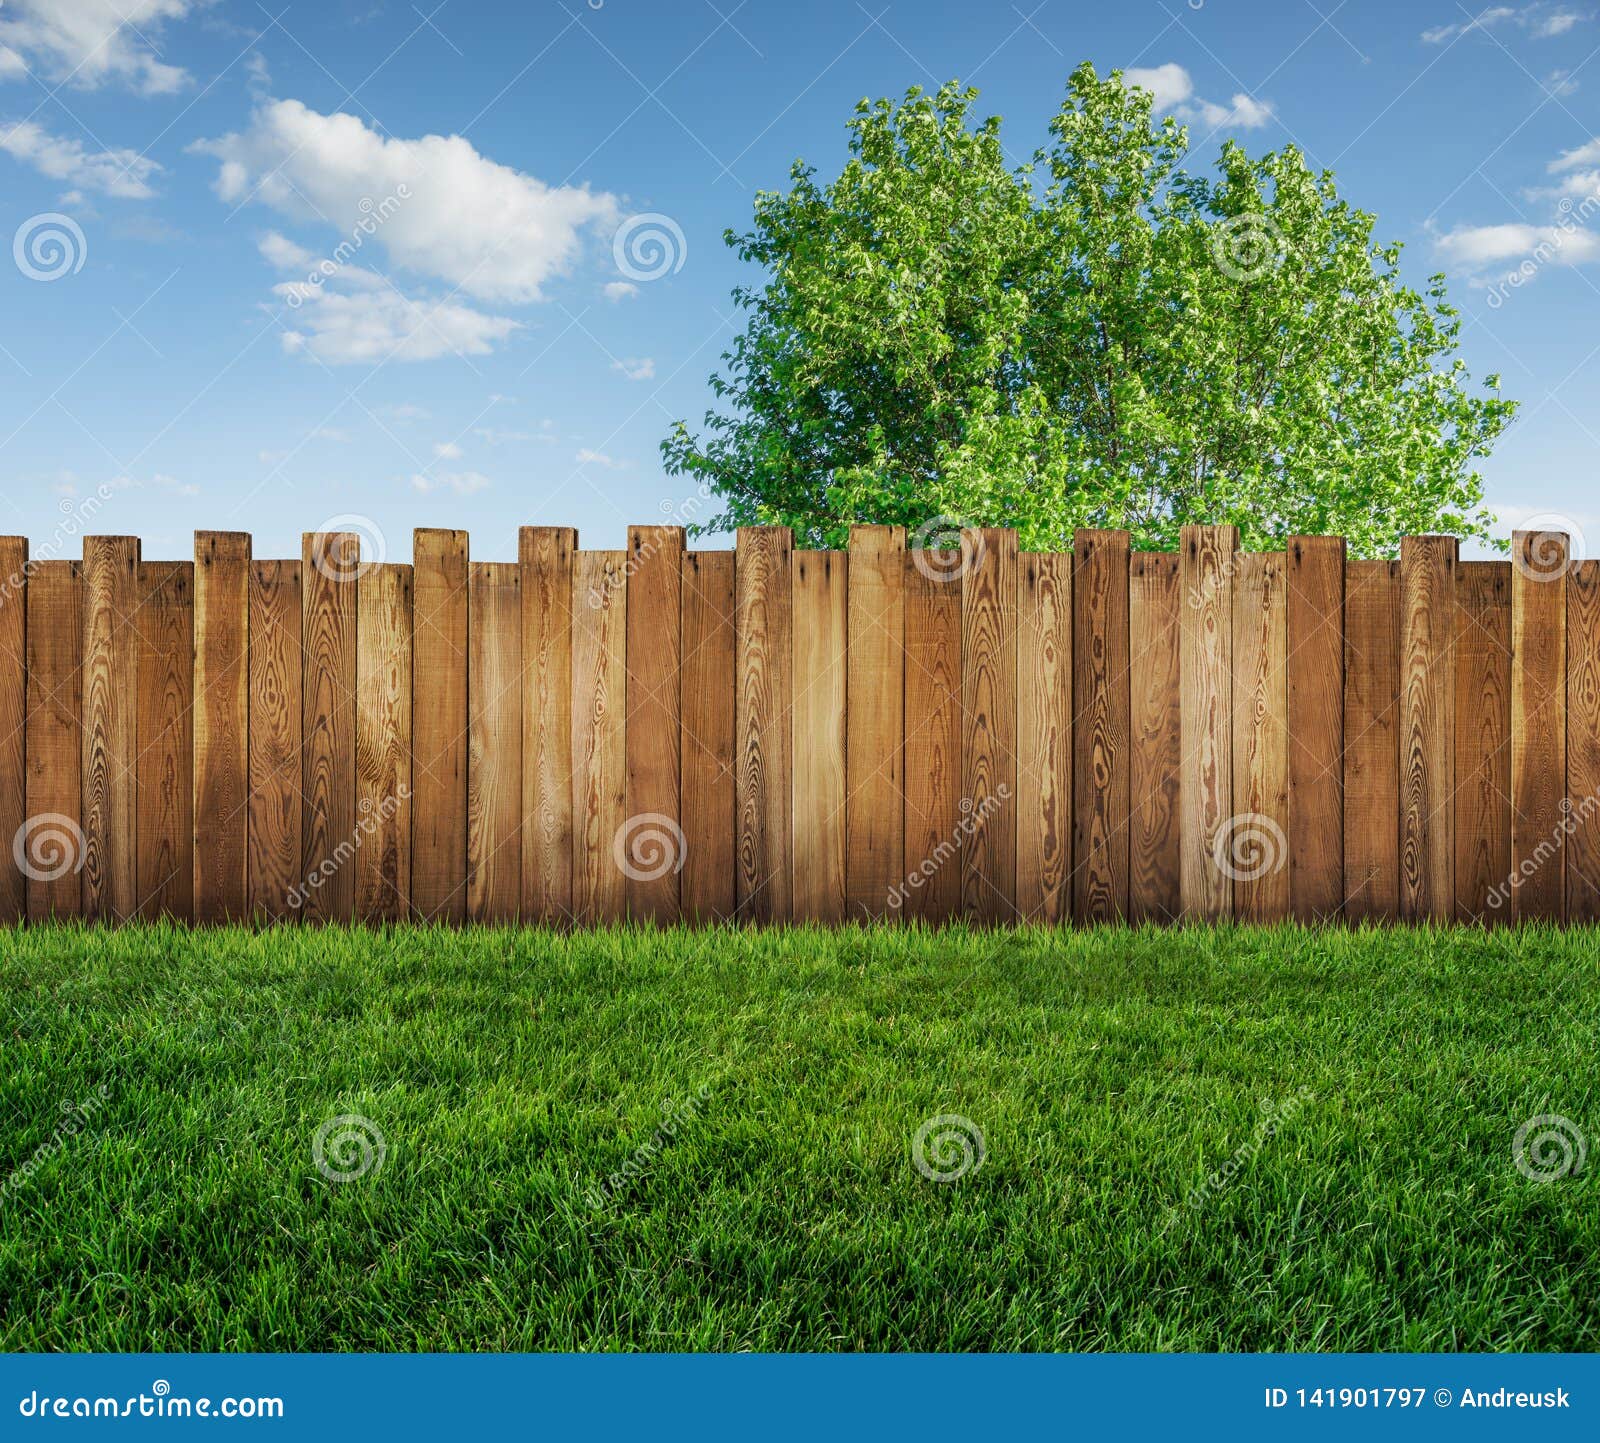 spring tree in backyard and wooden fence